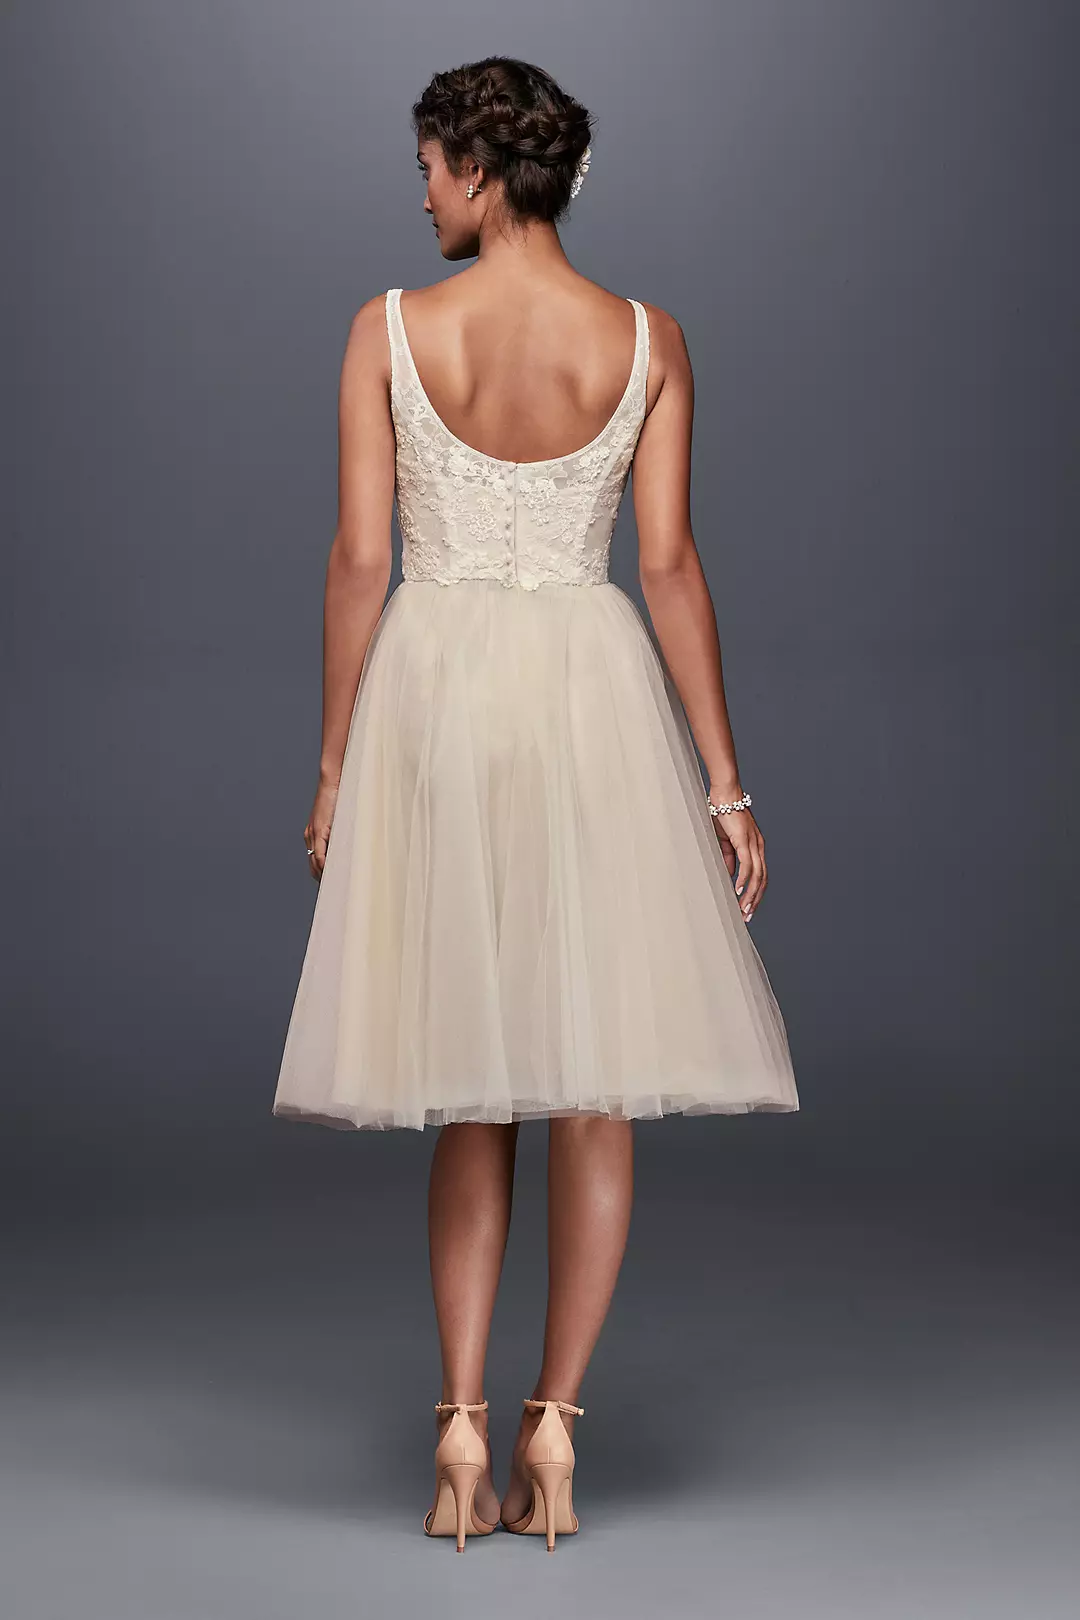 Tulle and Embroidered Lace Short Wedding Dress Image 2